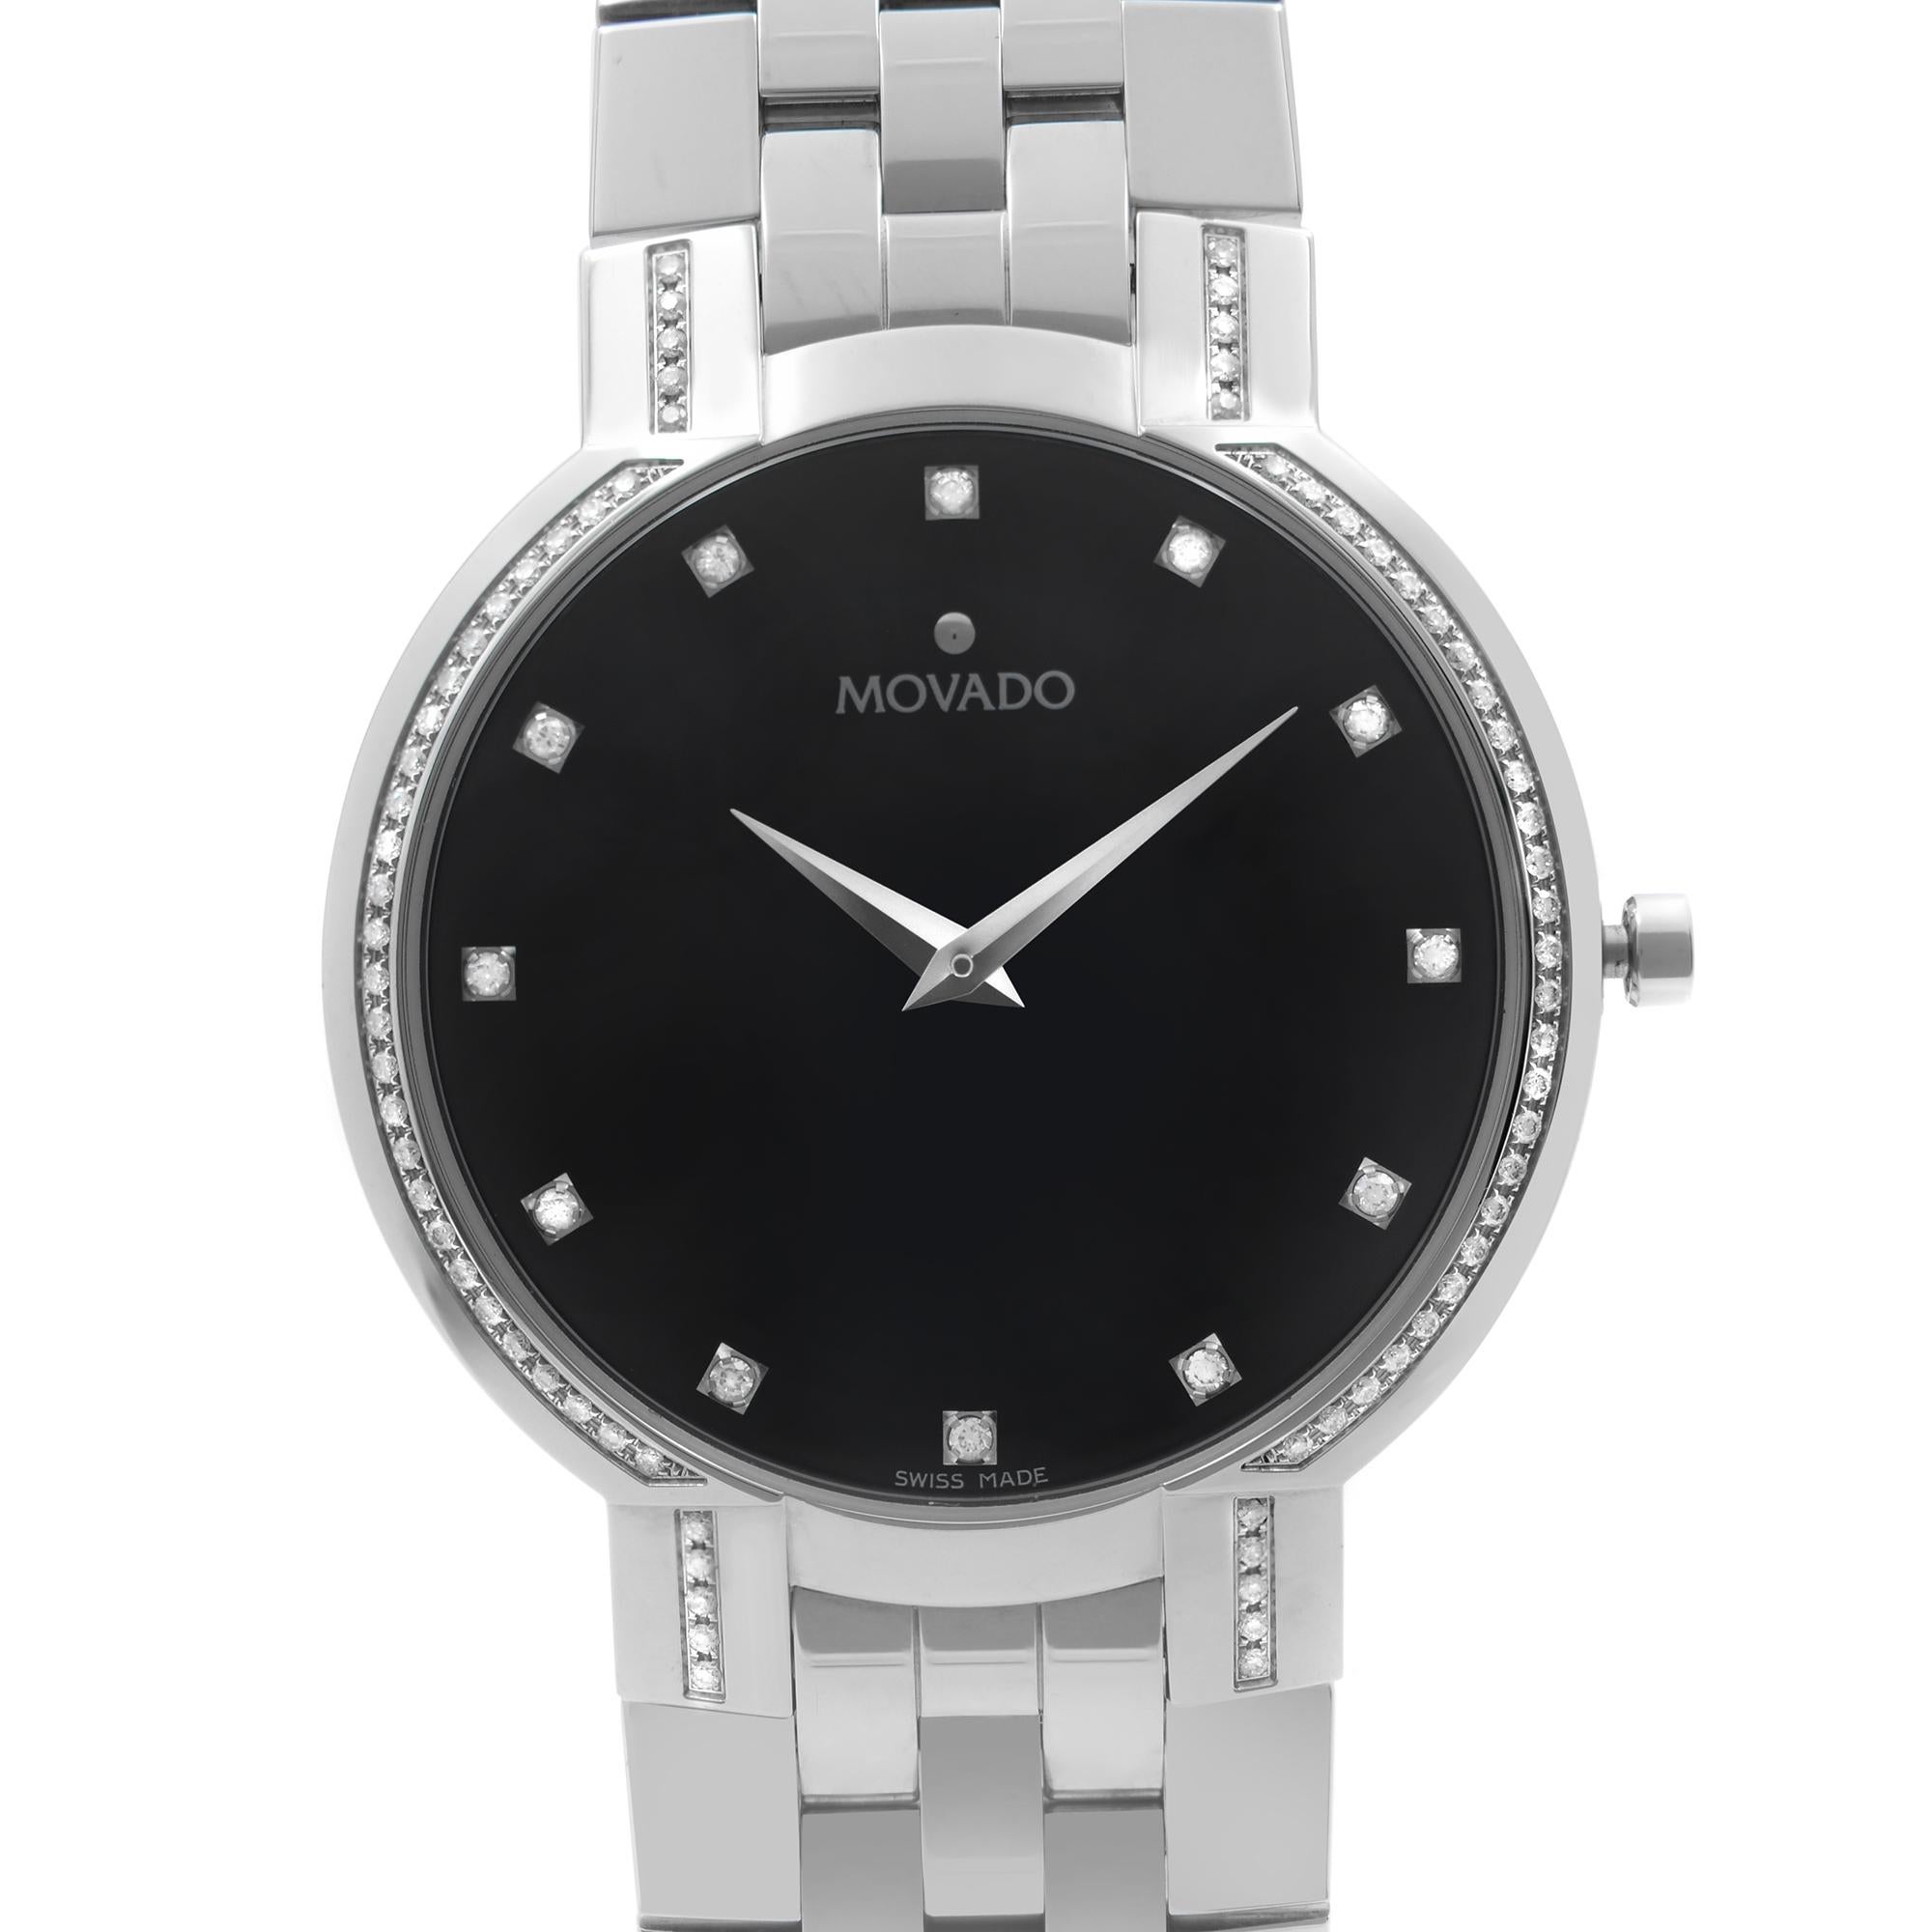 Unworn Movado Faceto 38mm Diamonds Stainless Steel Black Dial Quartz Men's Watch 0606237. This Timepiece Features: Stainless Steel Case and Bracelet, Fixed Stainless Steel Bezel Set with Diamonds, Black Dial with Silver-Tone Hands, And Diamond Hour